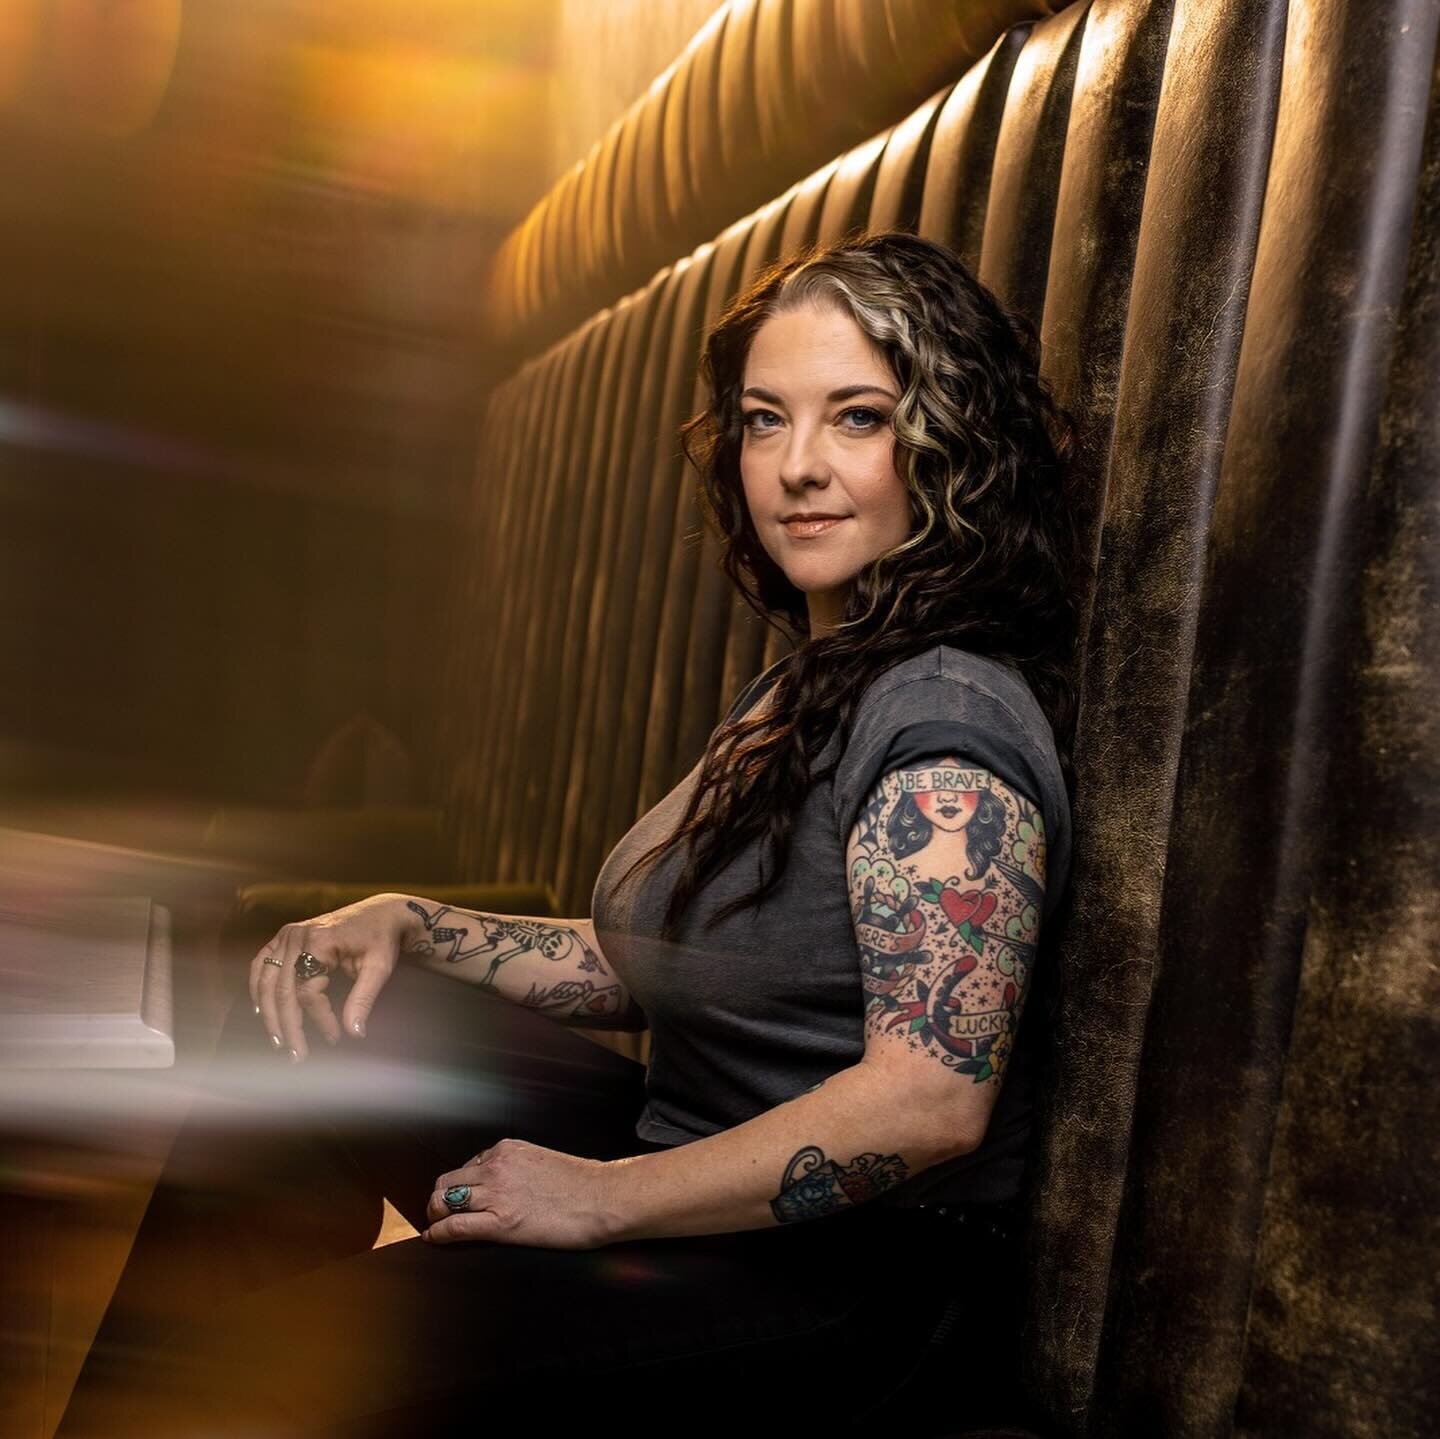 TONIGHT: Grammy award-winning country artist @ashleymcbryde takes the stage for The Devil I Know Tour!

Set times:
Doors - 7:00pm
Kasey Tyndall - 8:00pm
Ashley McBryde - 9:00pm&nbsp;
*all times are subject to change

*must be 19+ with valid ID to att